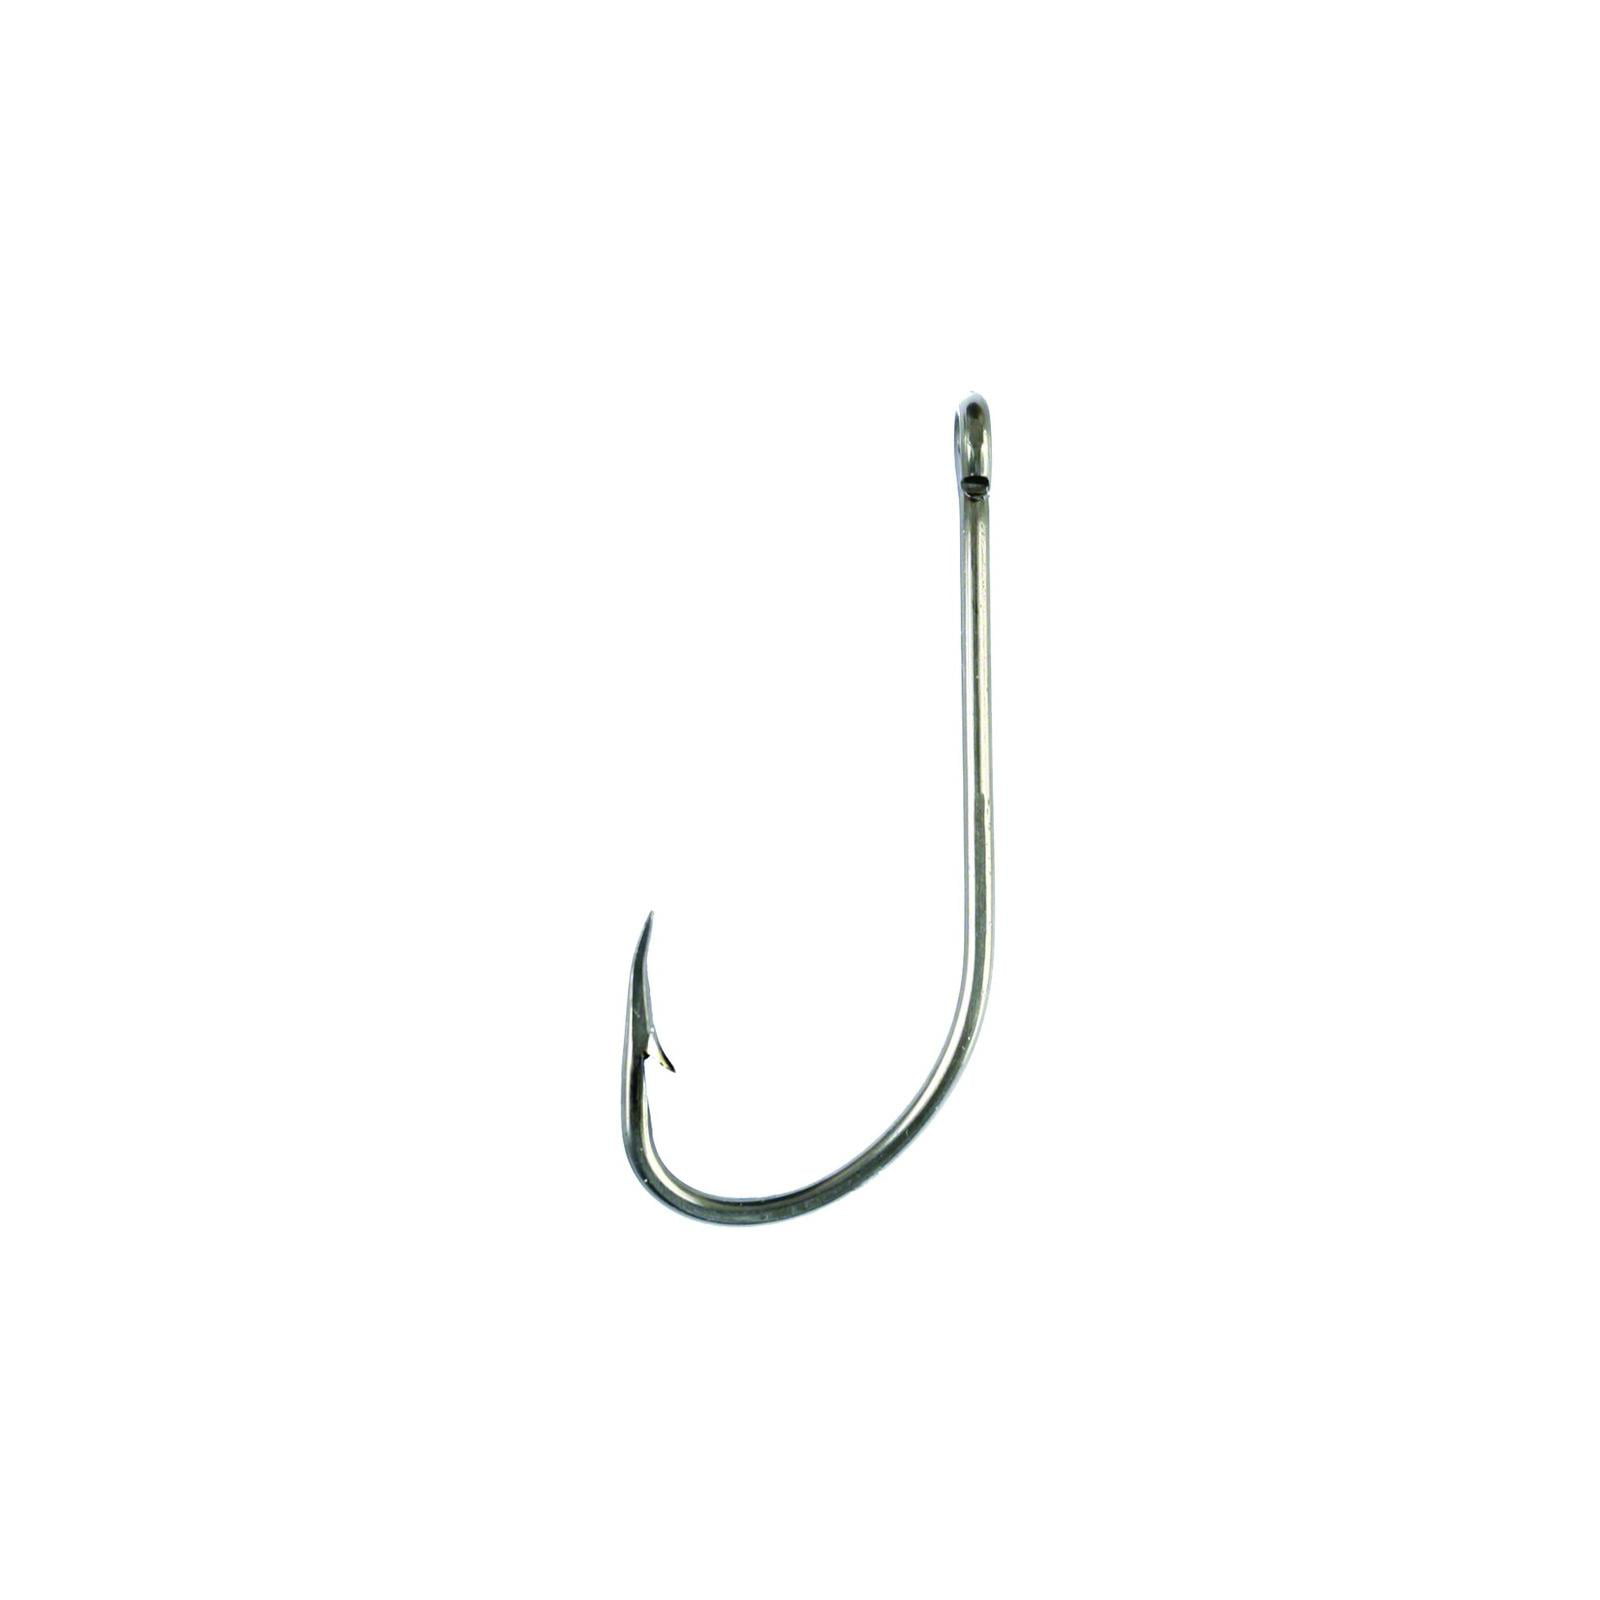 MADE IN USA 100 Size 3 Kahle Offset Hooks Straight Eye Bronze 